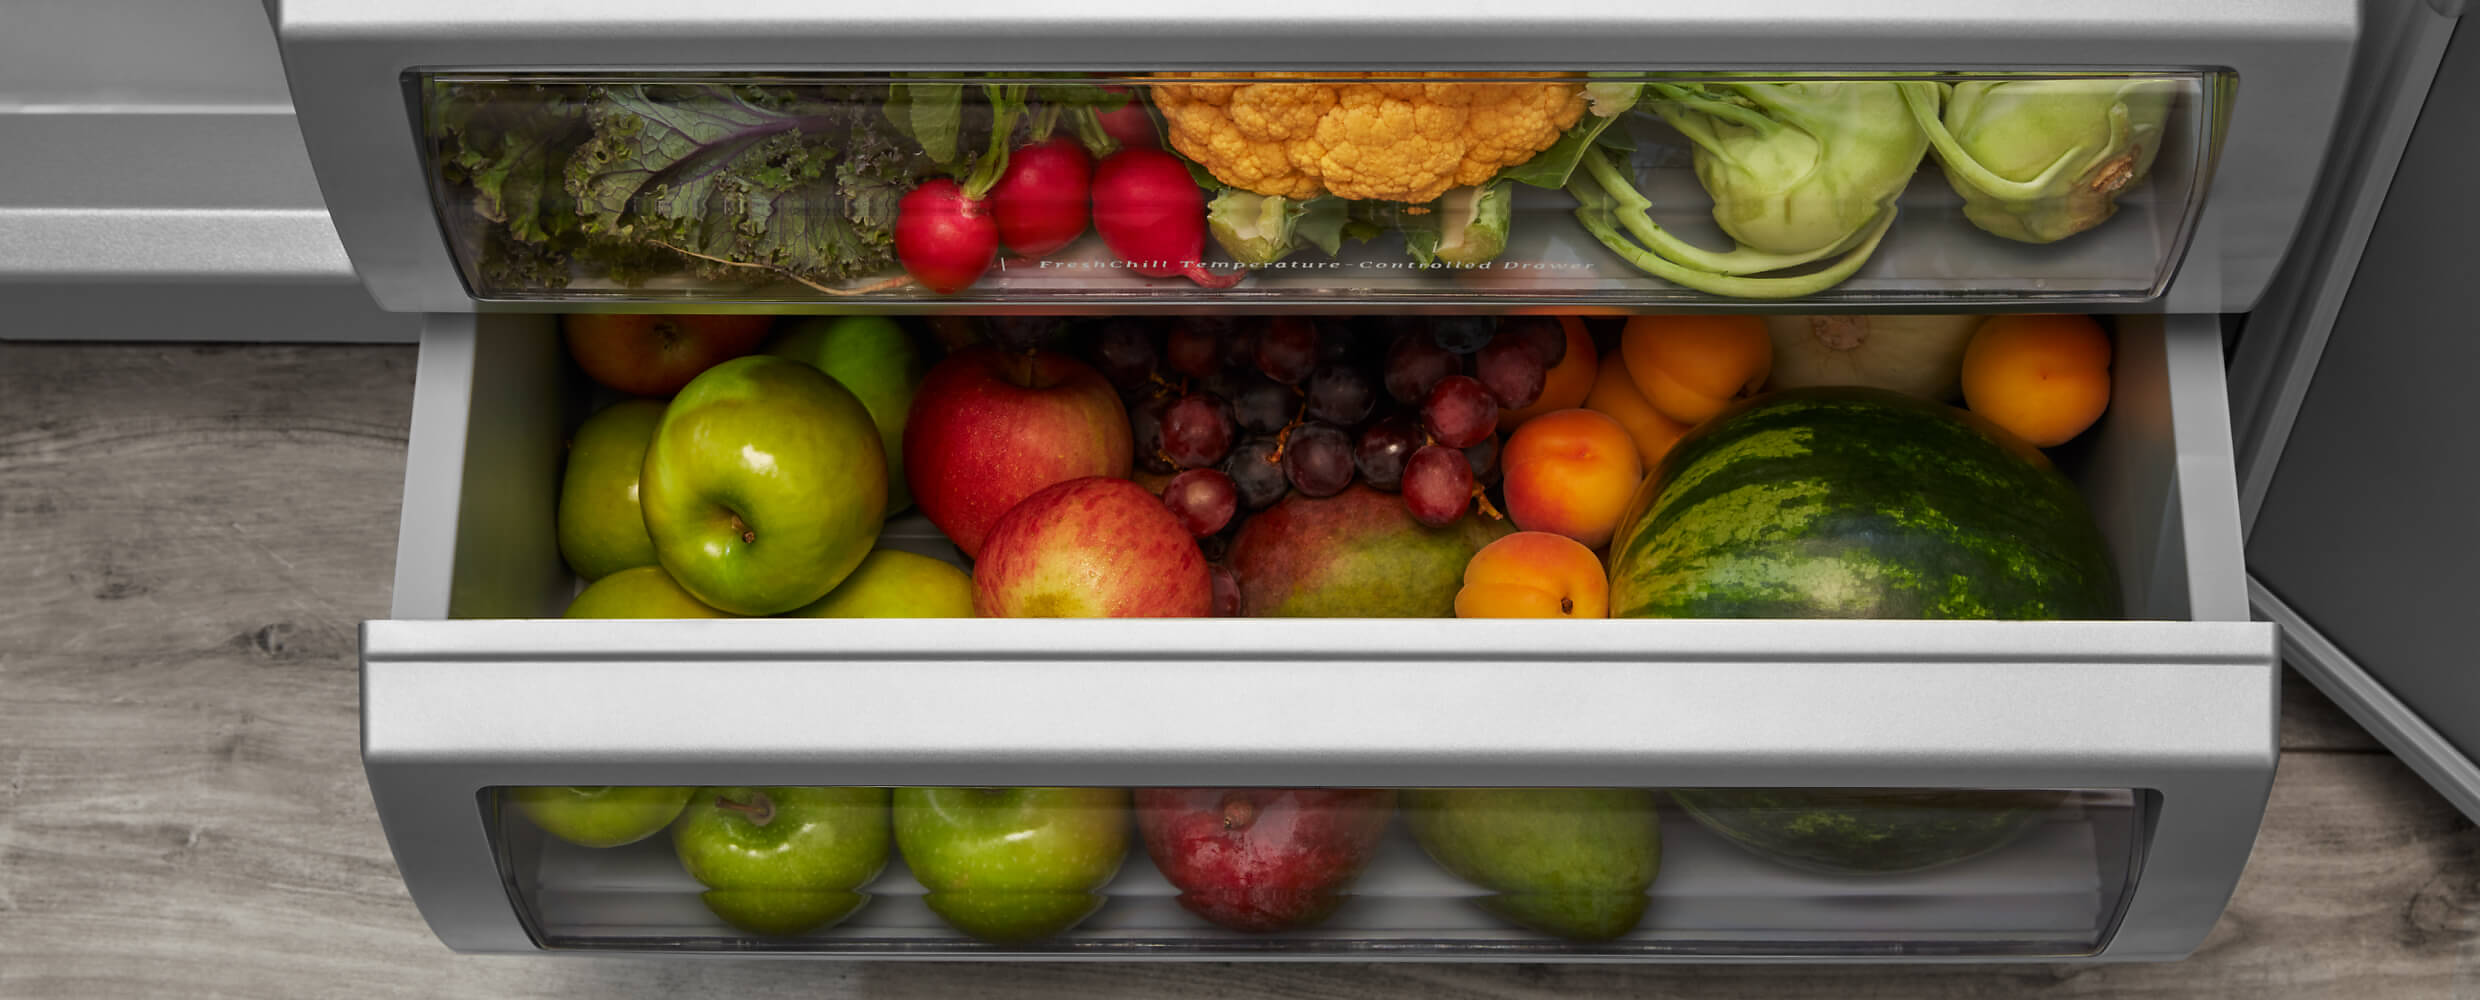 Produce in the FreshChill™ Temperature Controlled Drawer of the 48" KitchenAid® Built-In Side-by-Side Refrigerator